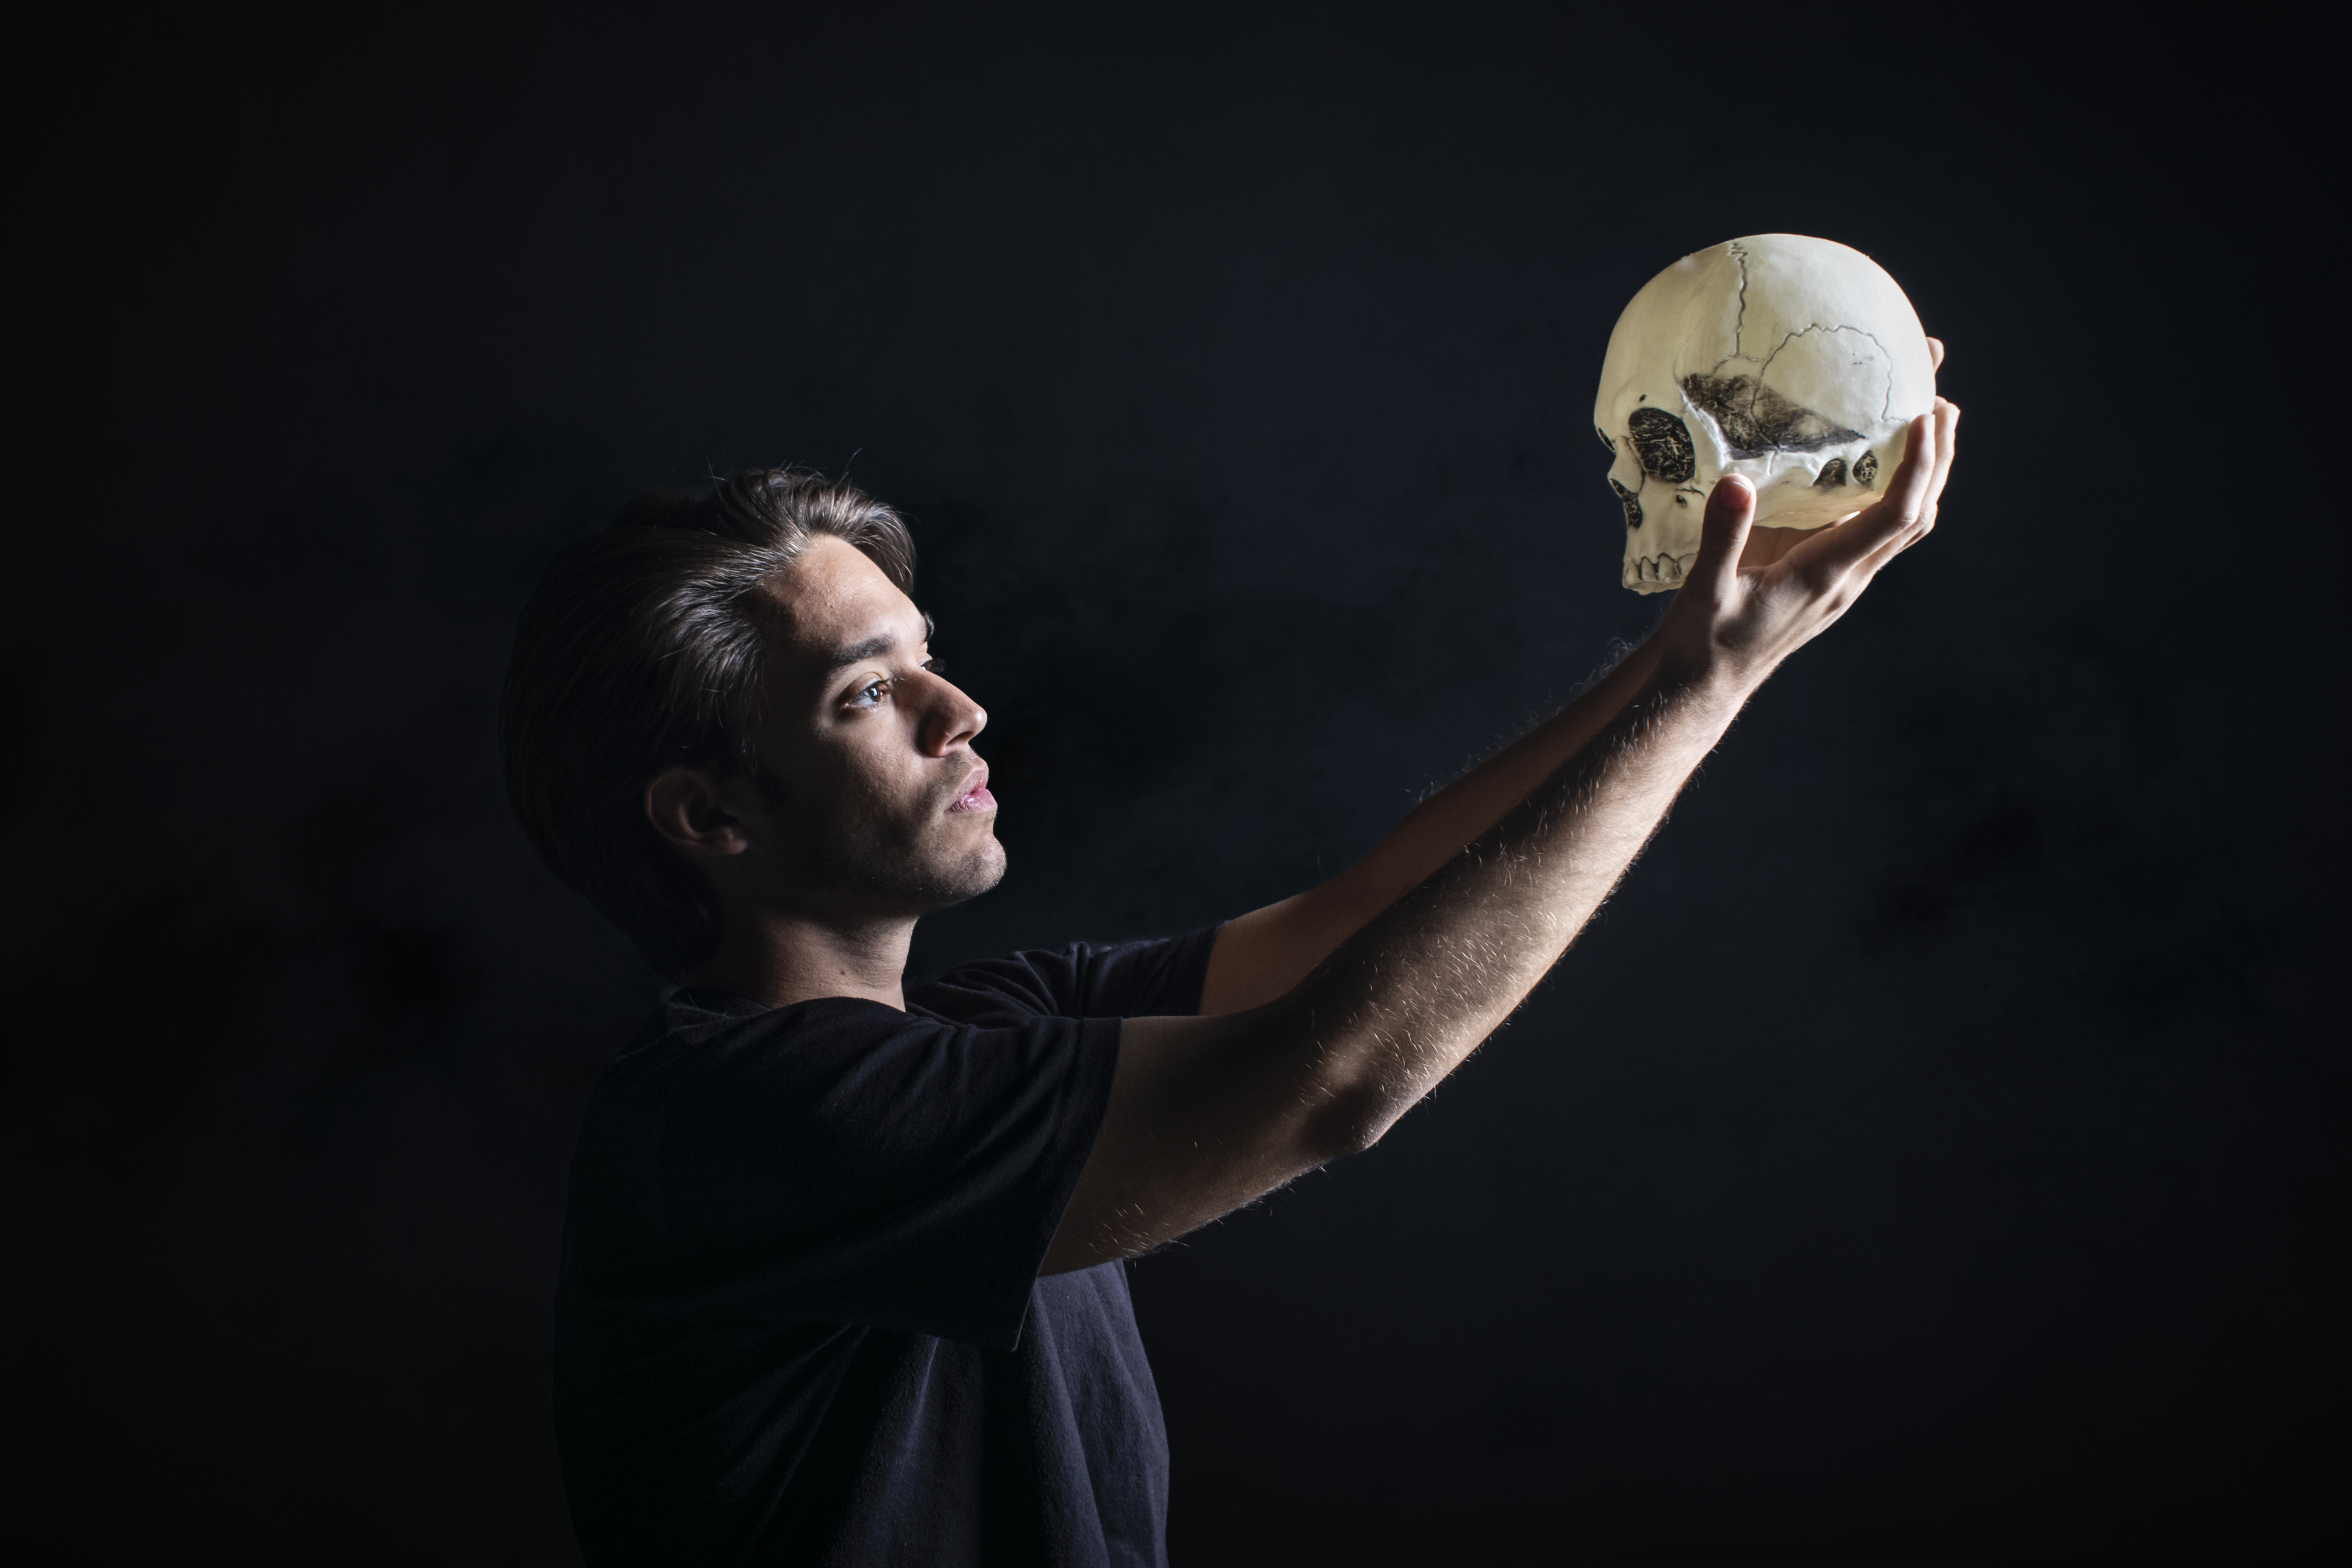 An actor, presumably playing Hamlet, holding up a skull while standing against an all-black background